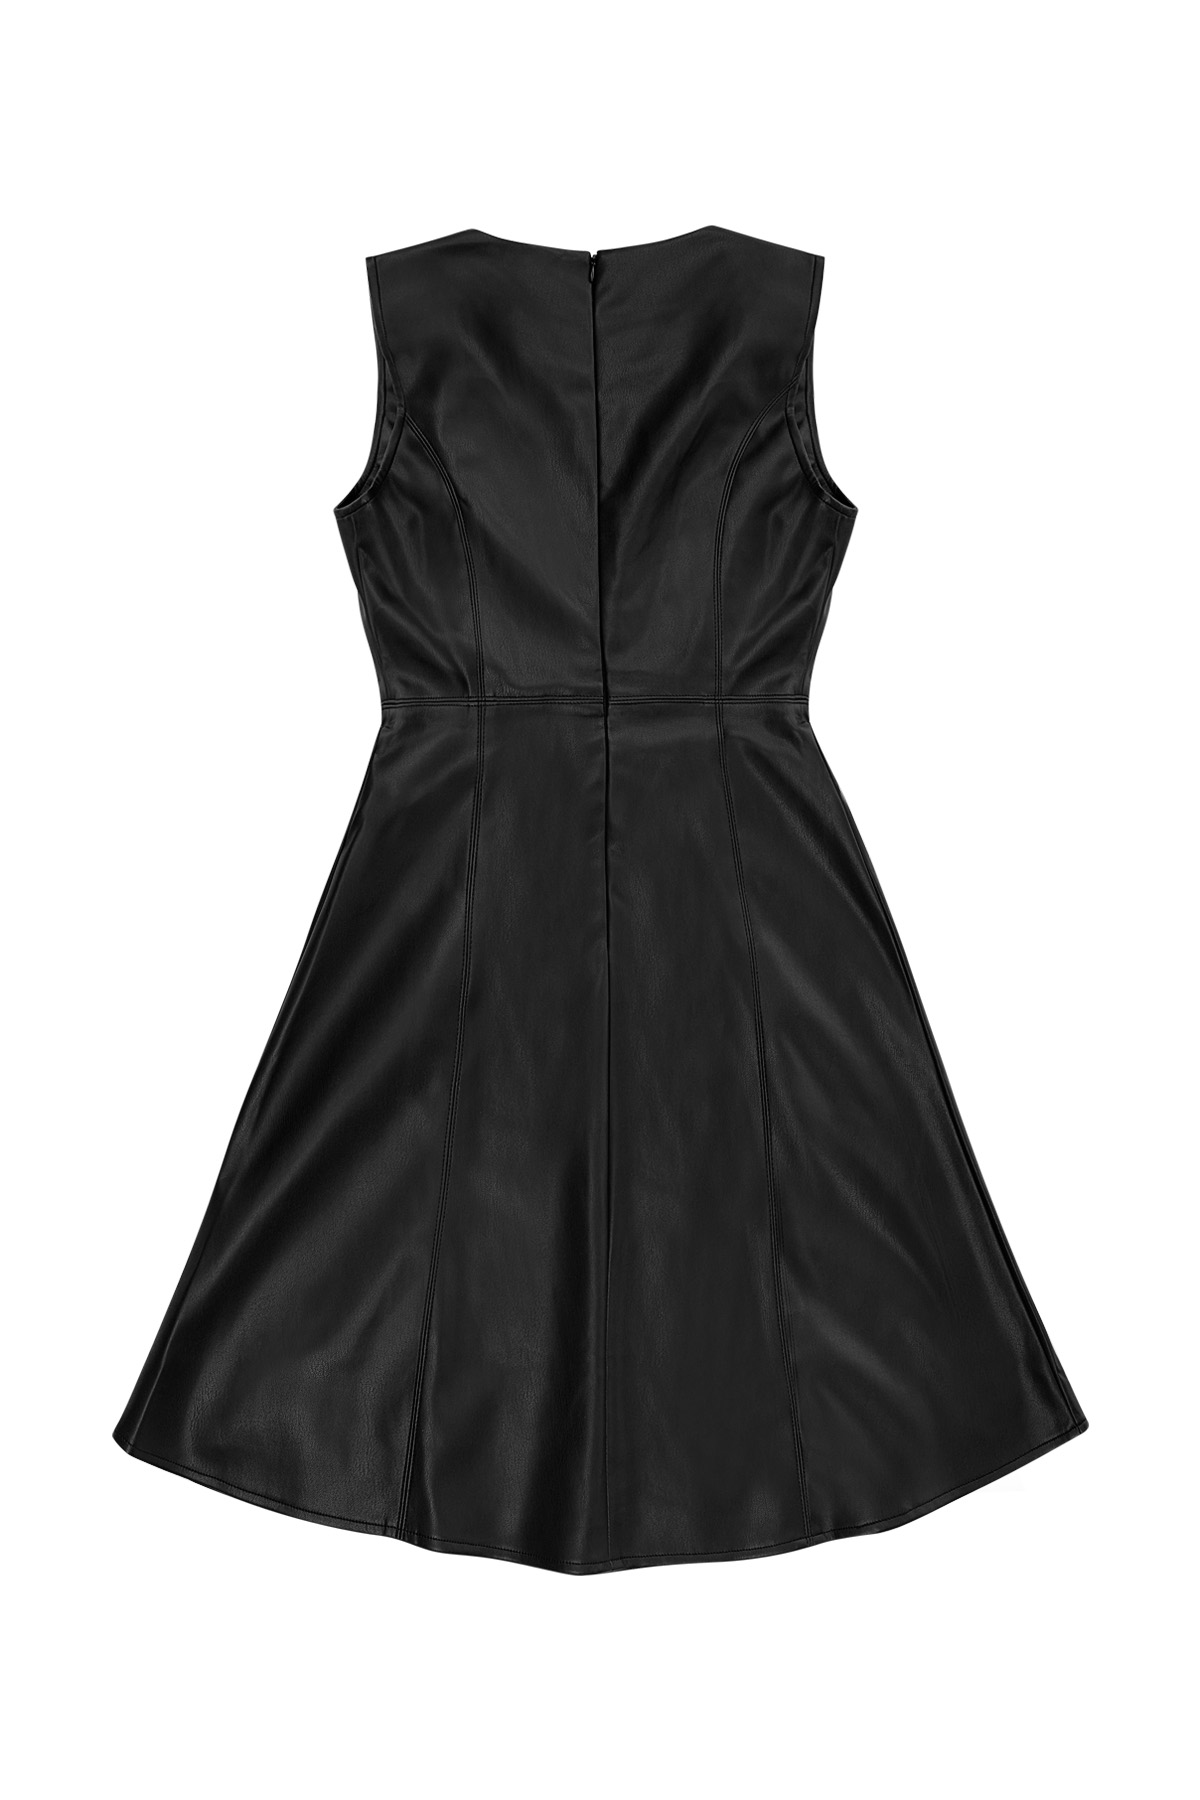 PU leather dress flared - black Picture7